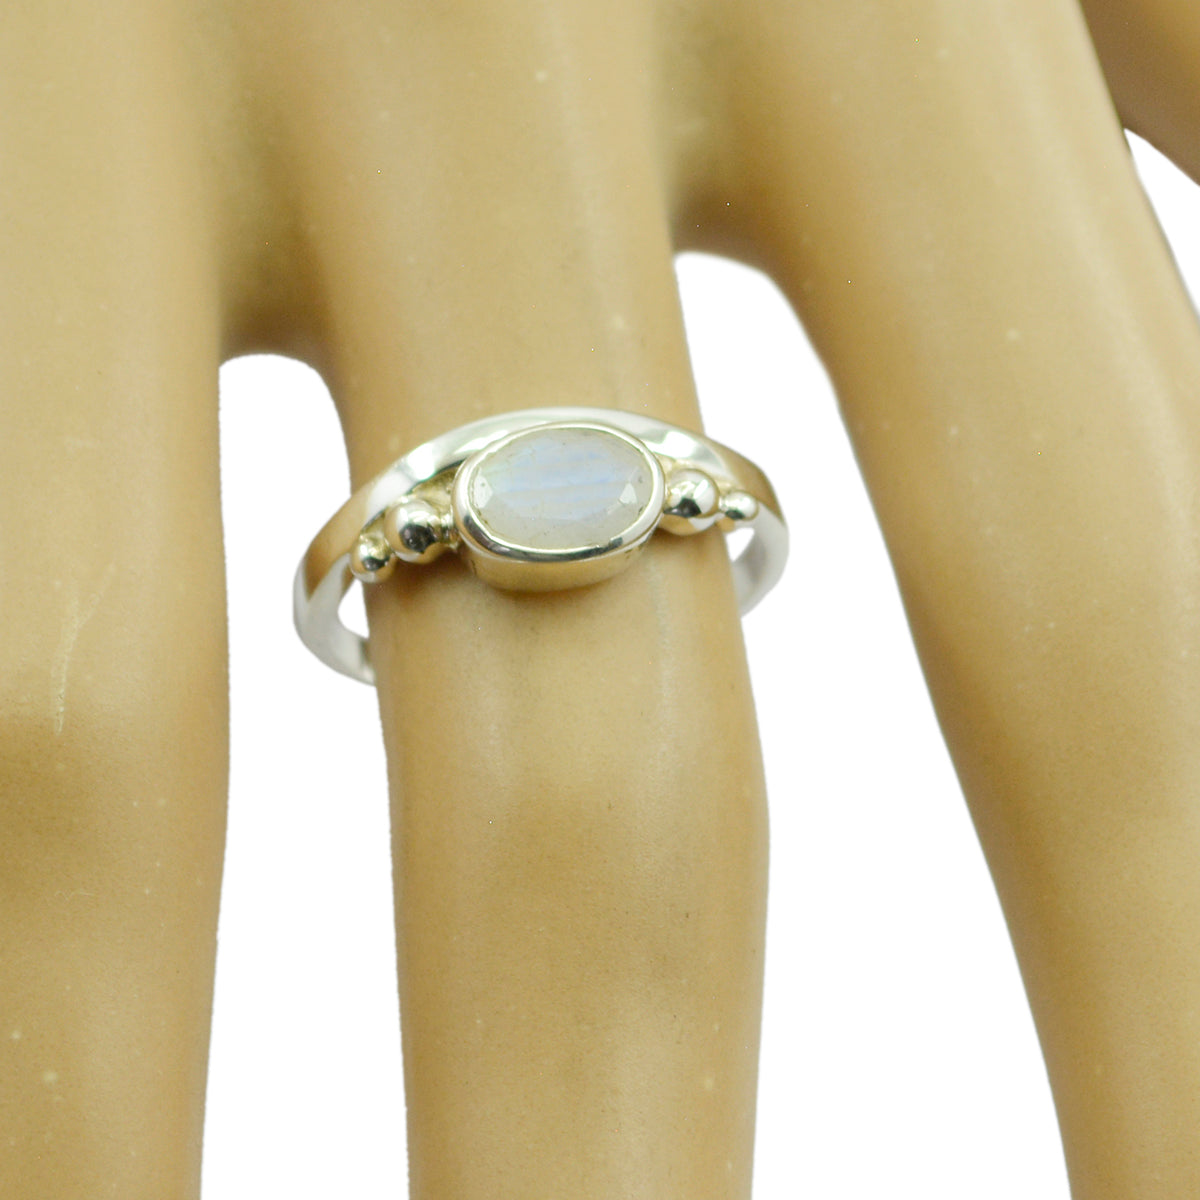 Wonderful. Stone Rainbow Moonstone Solid Silver Ring Gift Independence